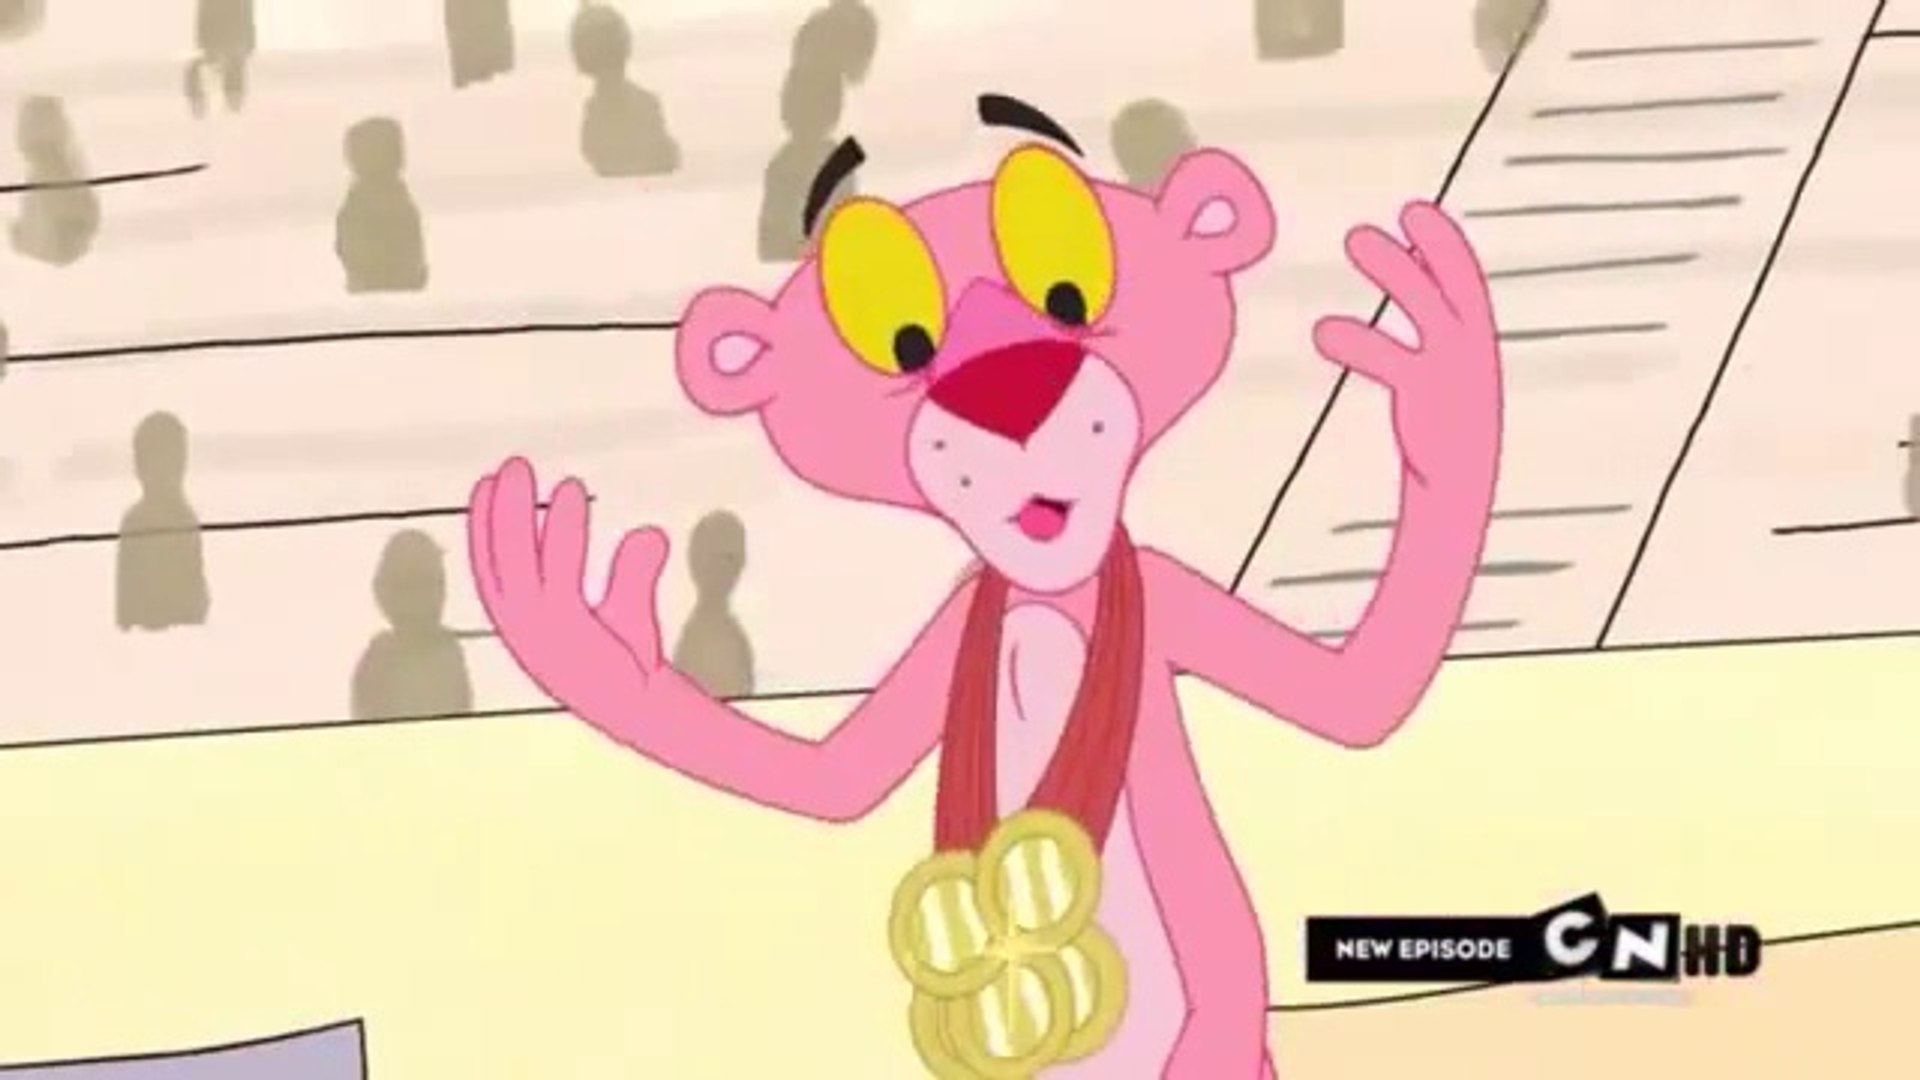 Pink Panther And Pals Cartoon 2016 (Part 4) HD - video Dailymotion